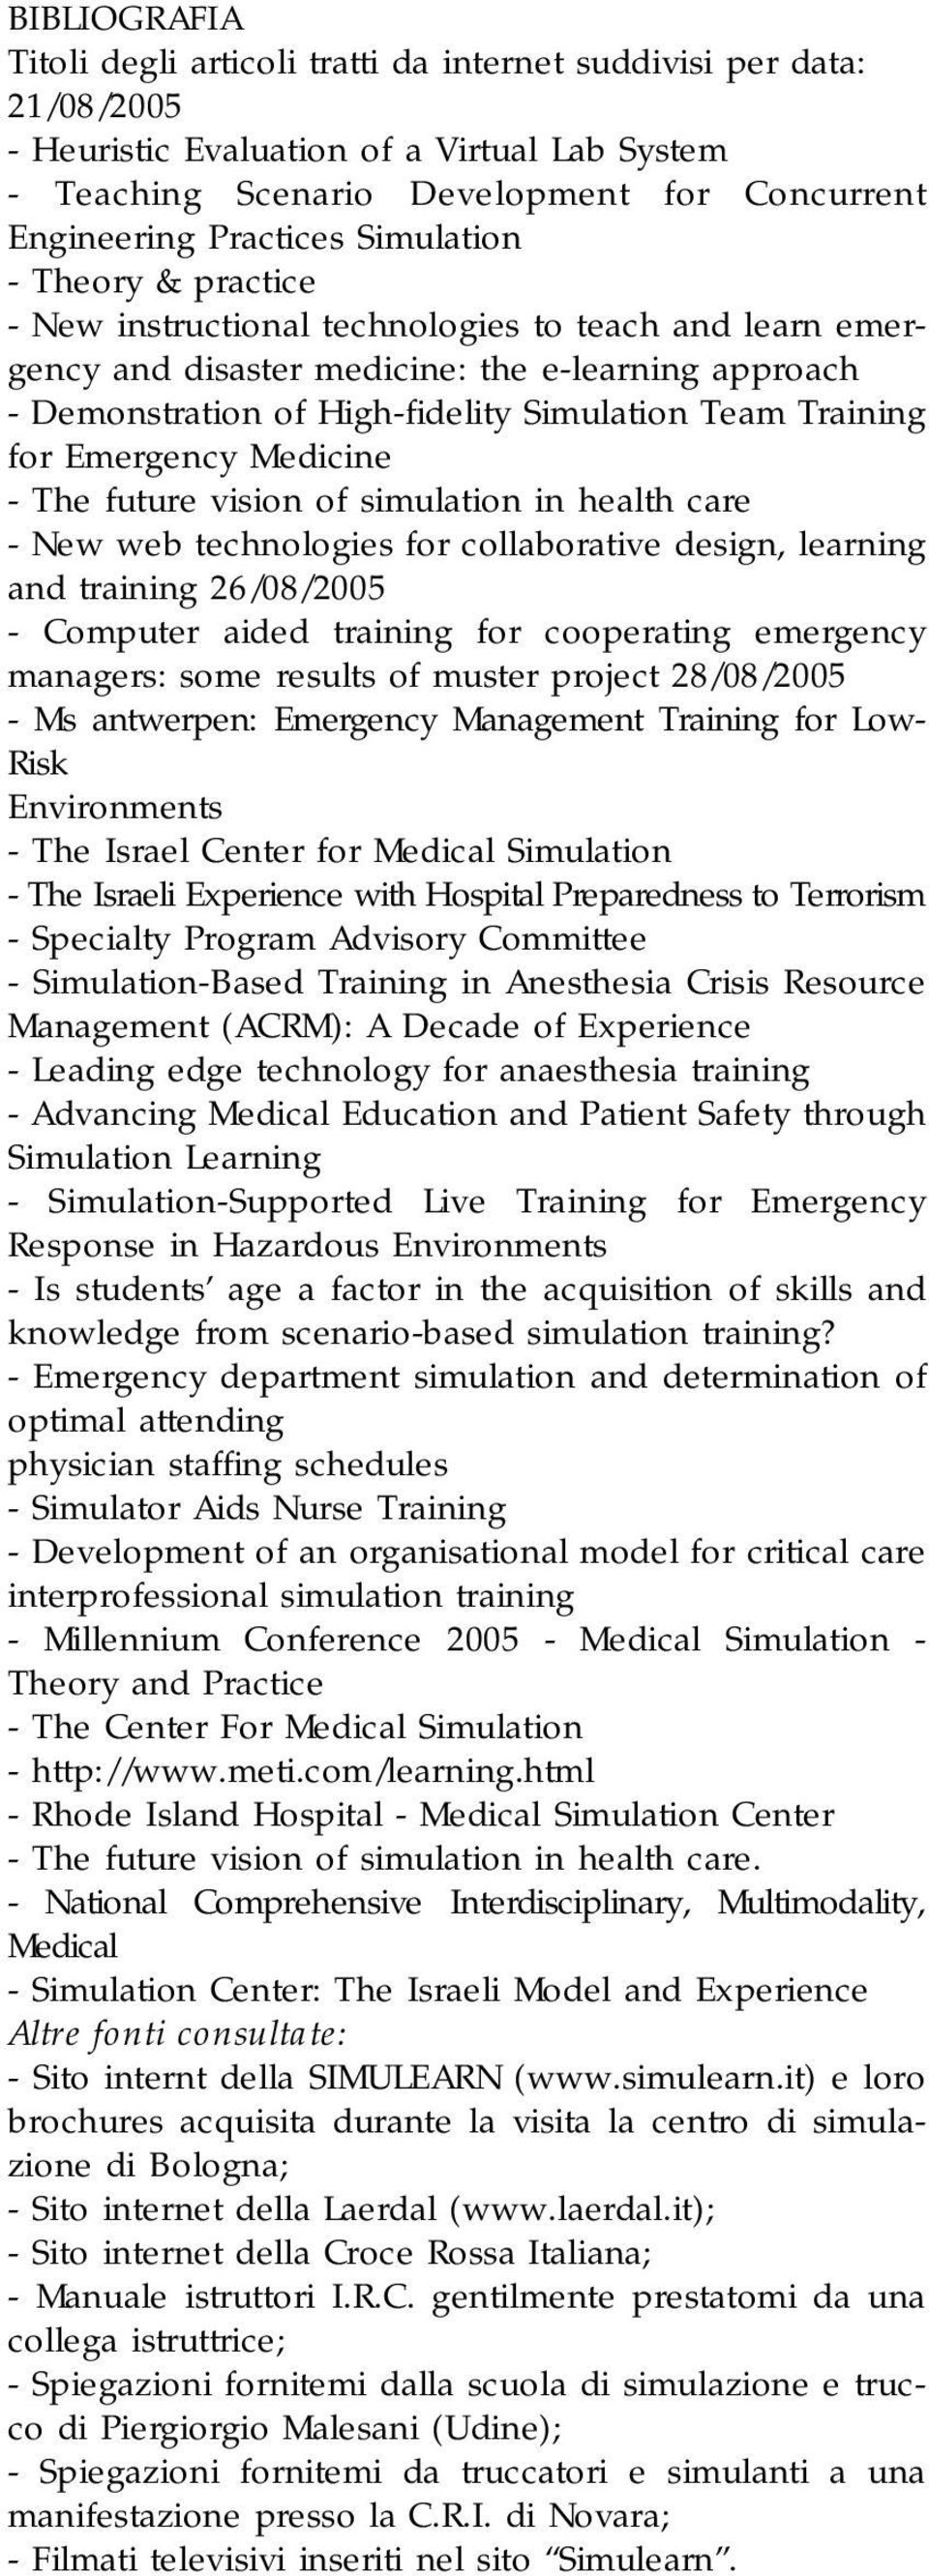 Training for Emergency Medicine - The future vision of simulation in health care - New web technologies for collaborative design, learning and training 26/08/2005 - Computer aided training for